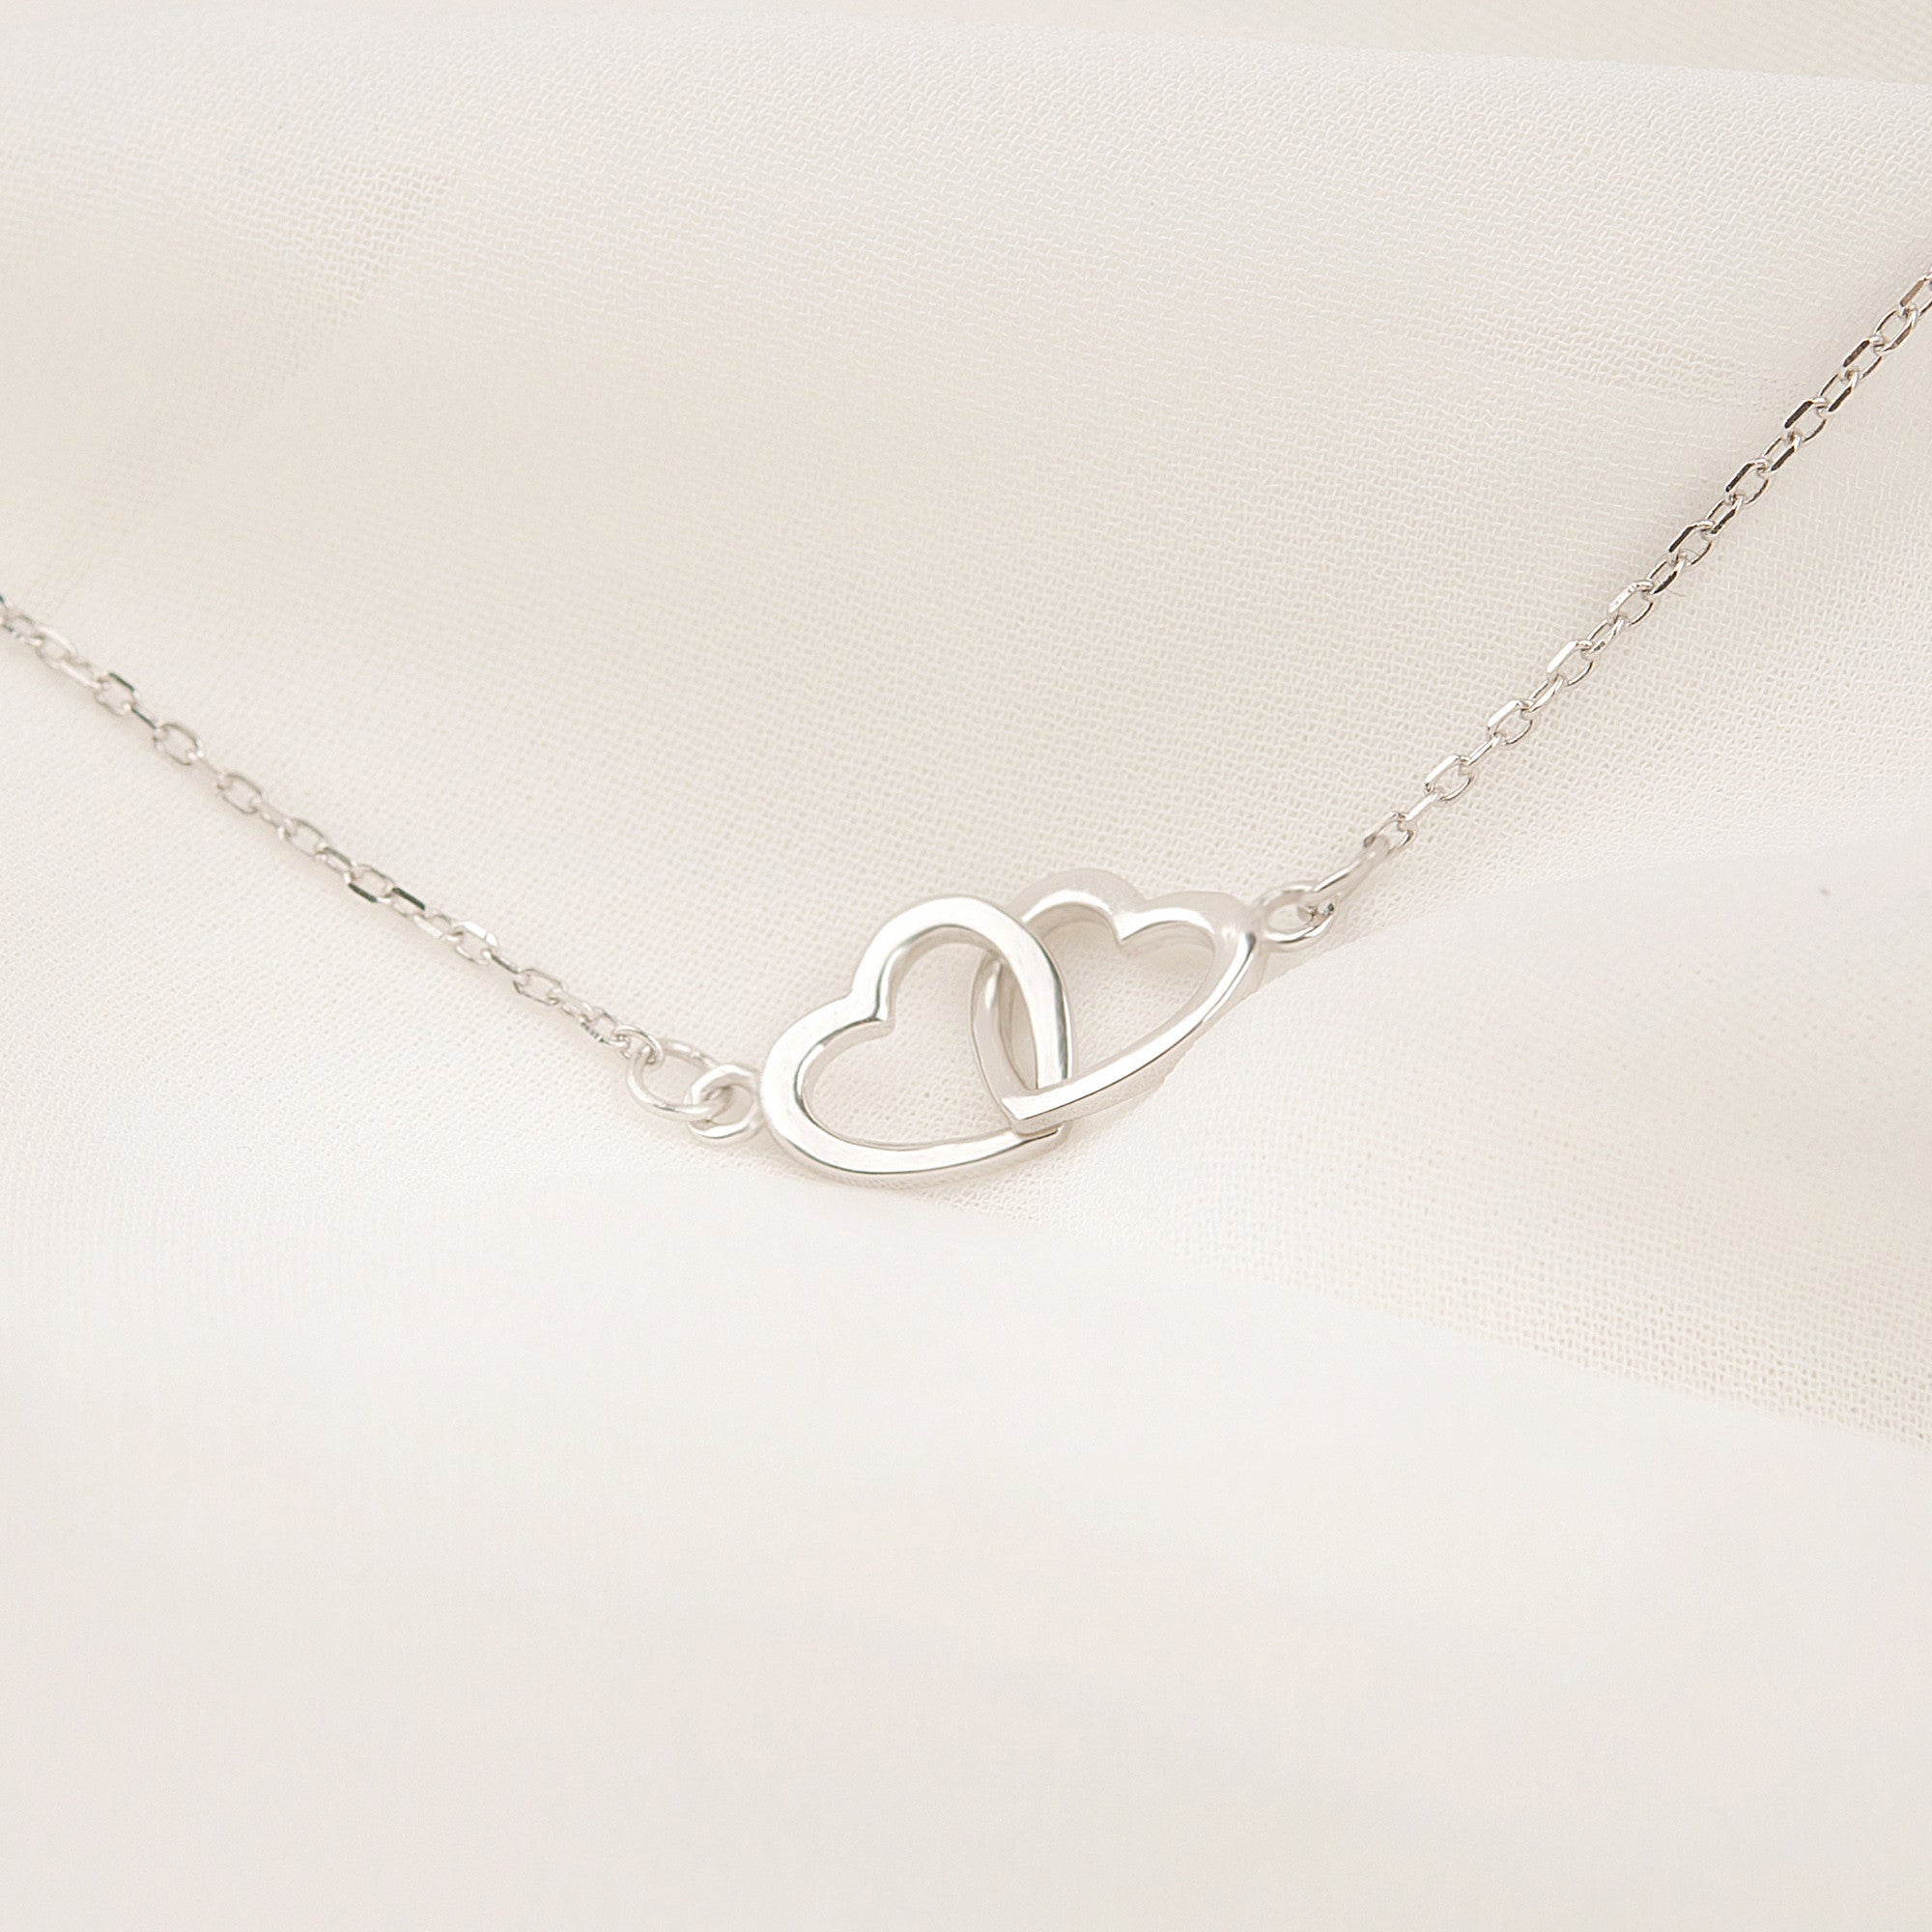 Silver Heart Necklace, Sterling Silver, Teenage Girl Gifts, Gift for Her, Mothers Day Gift, Mothers Day Jewellery